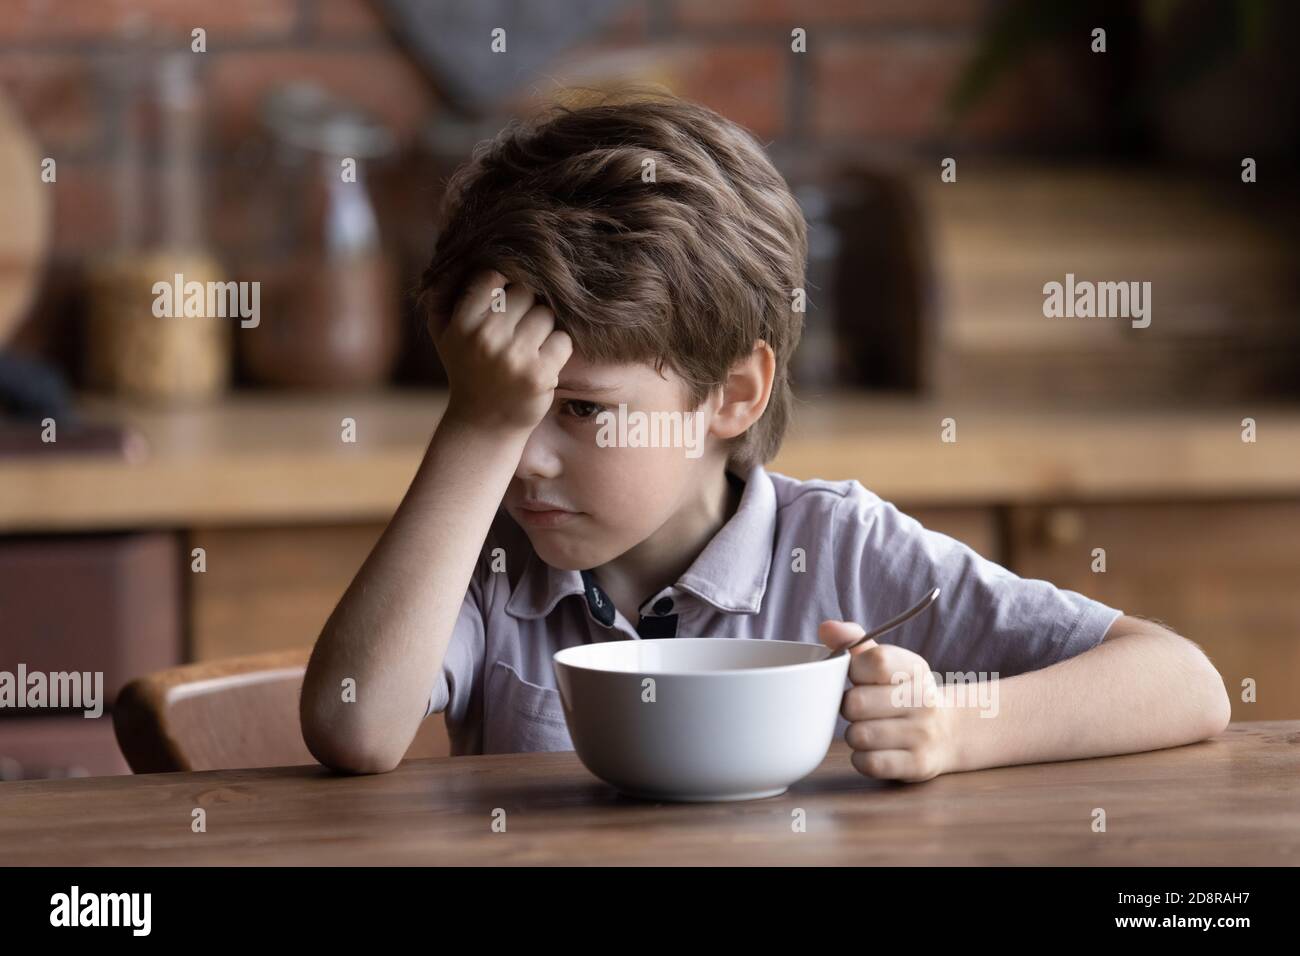 Unhappy little boy child refuse eating healthy food Stock Photo